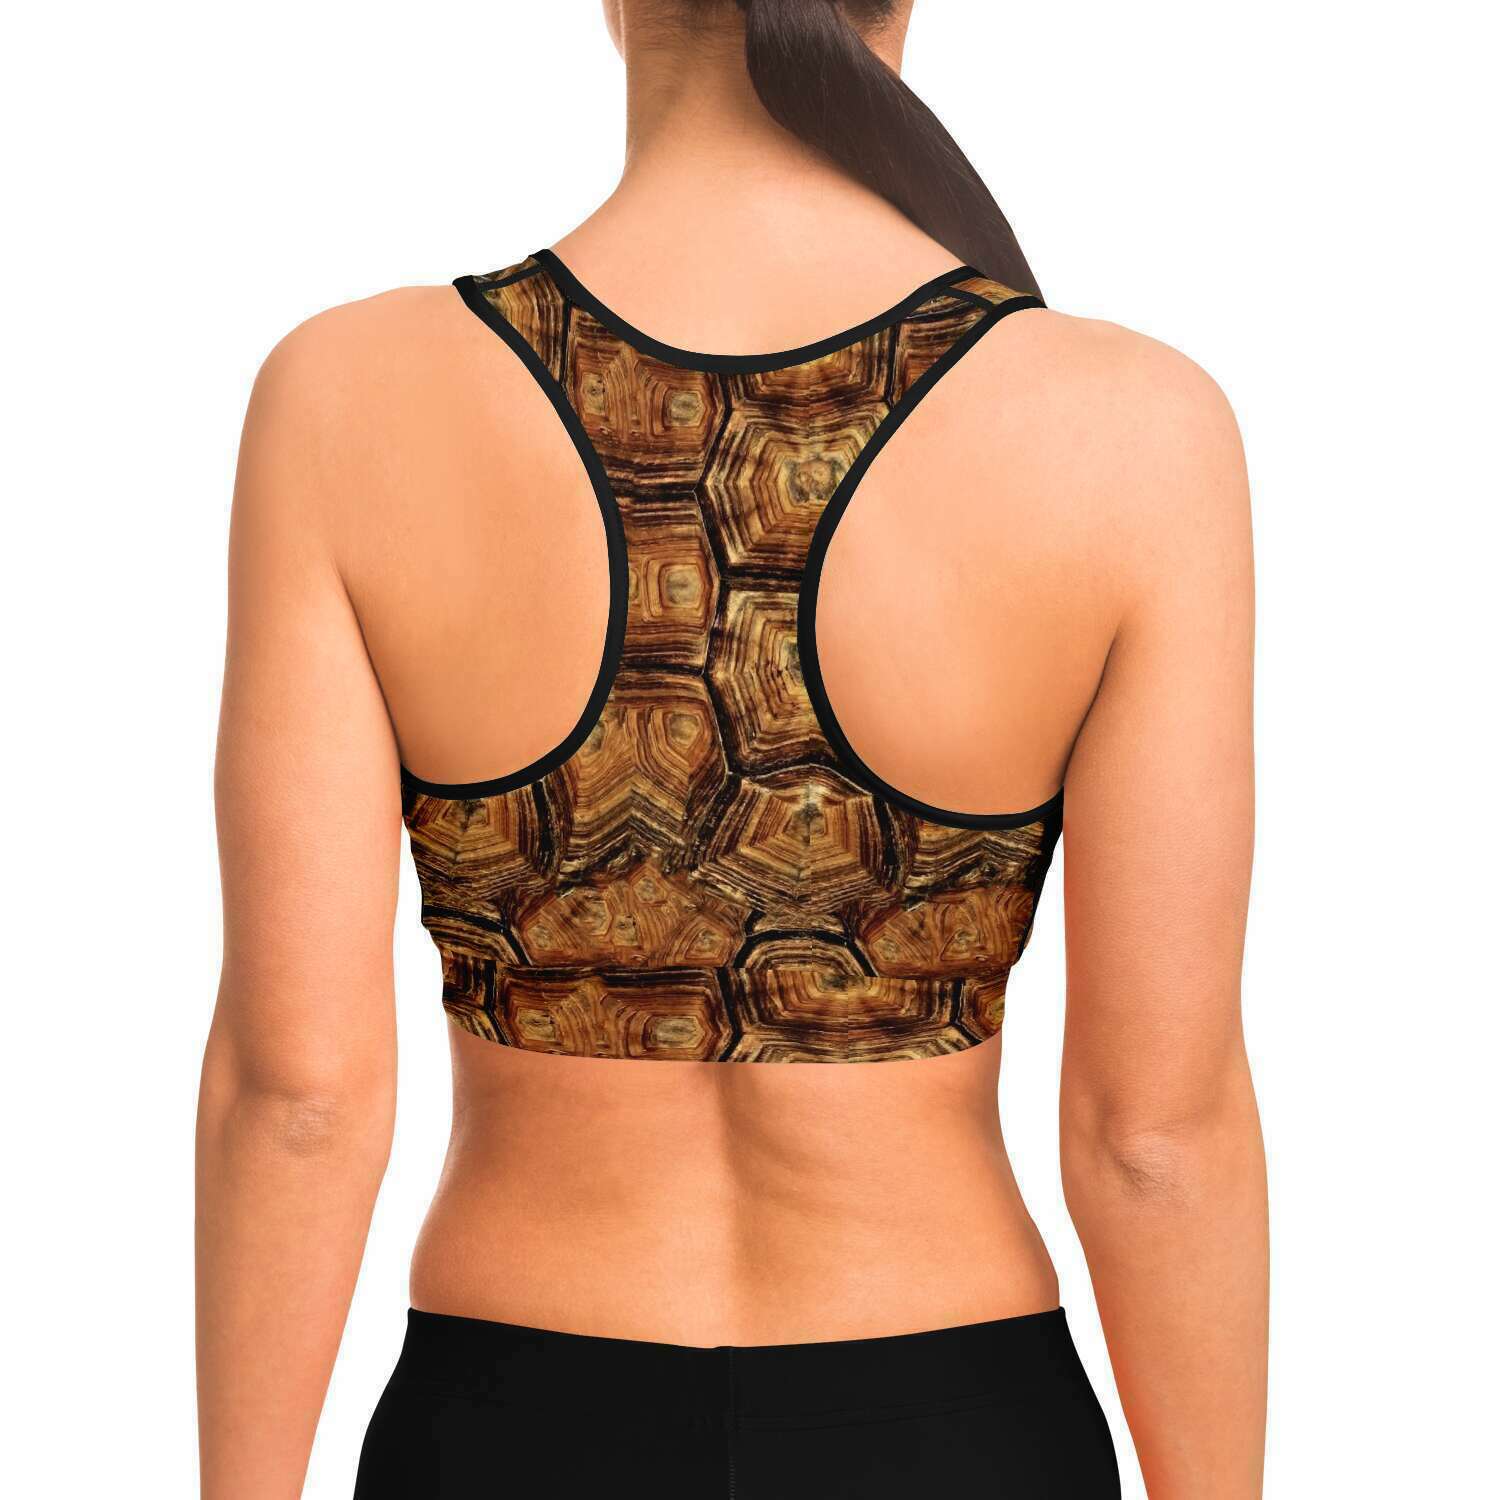 Back view of model wearing turtle racer-back crop top / sports bra for scuba diving and yoga